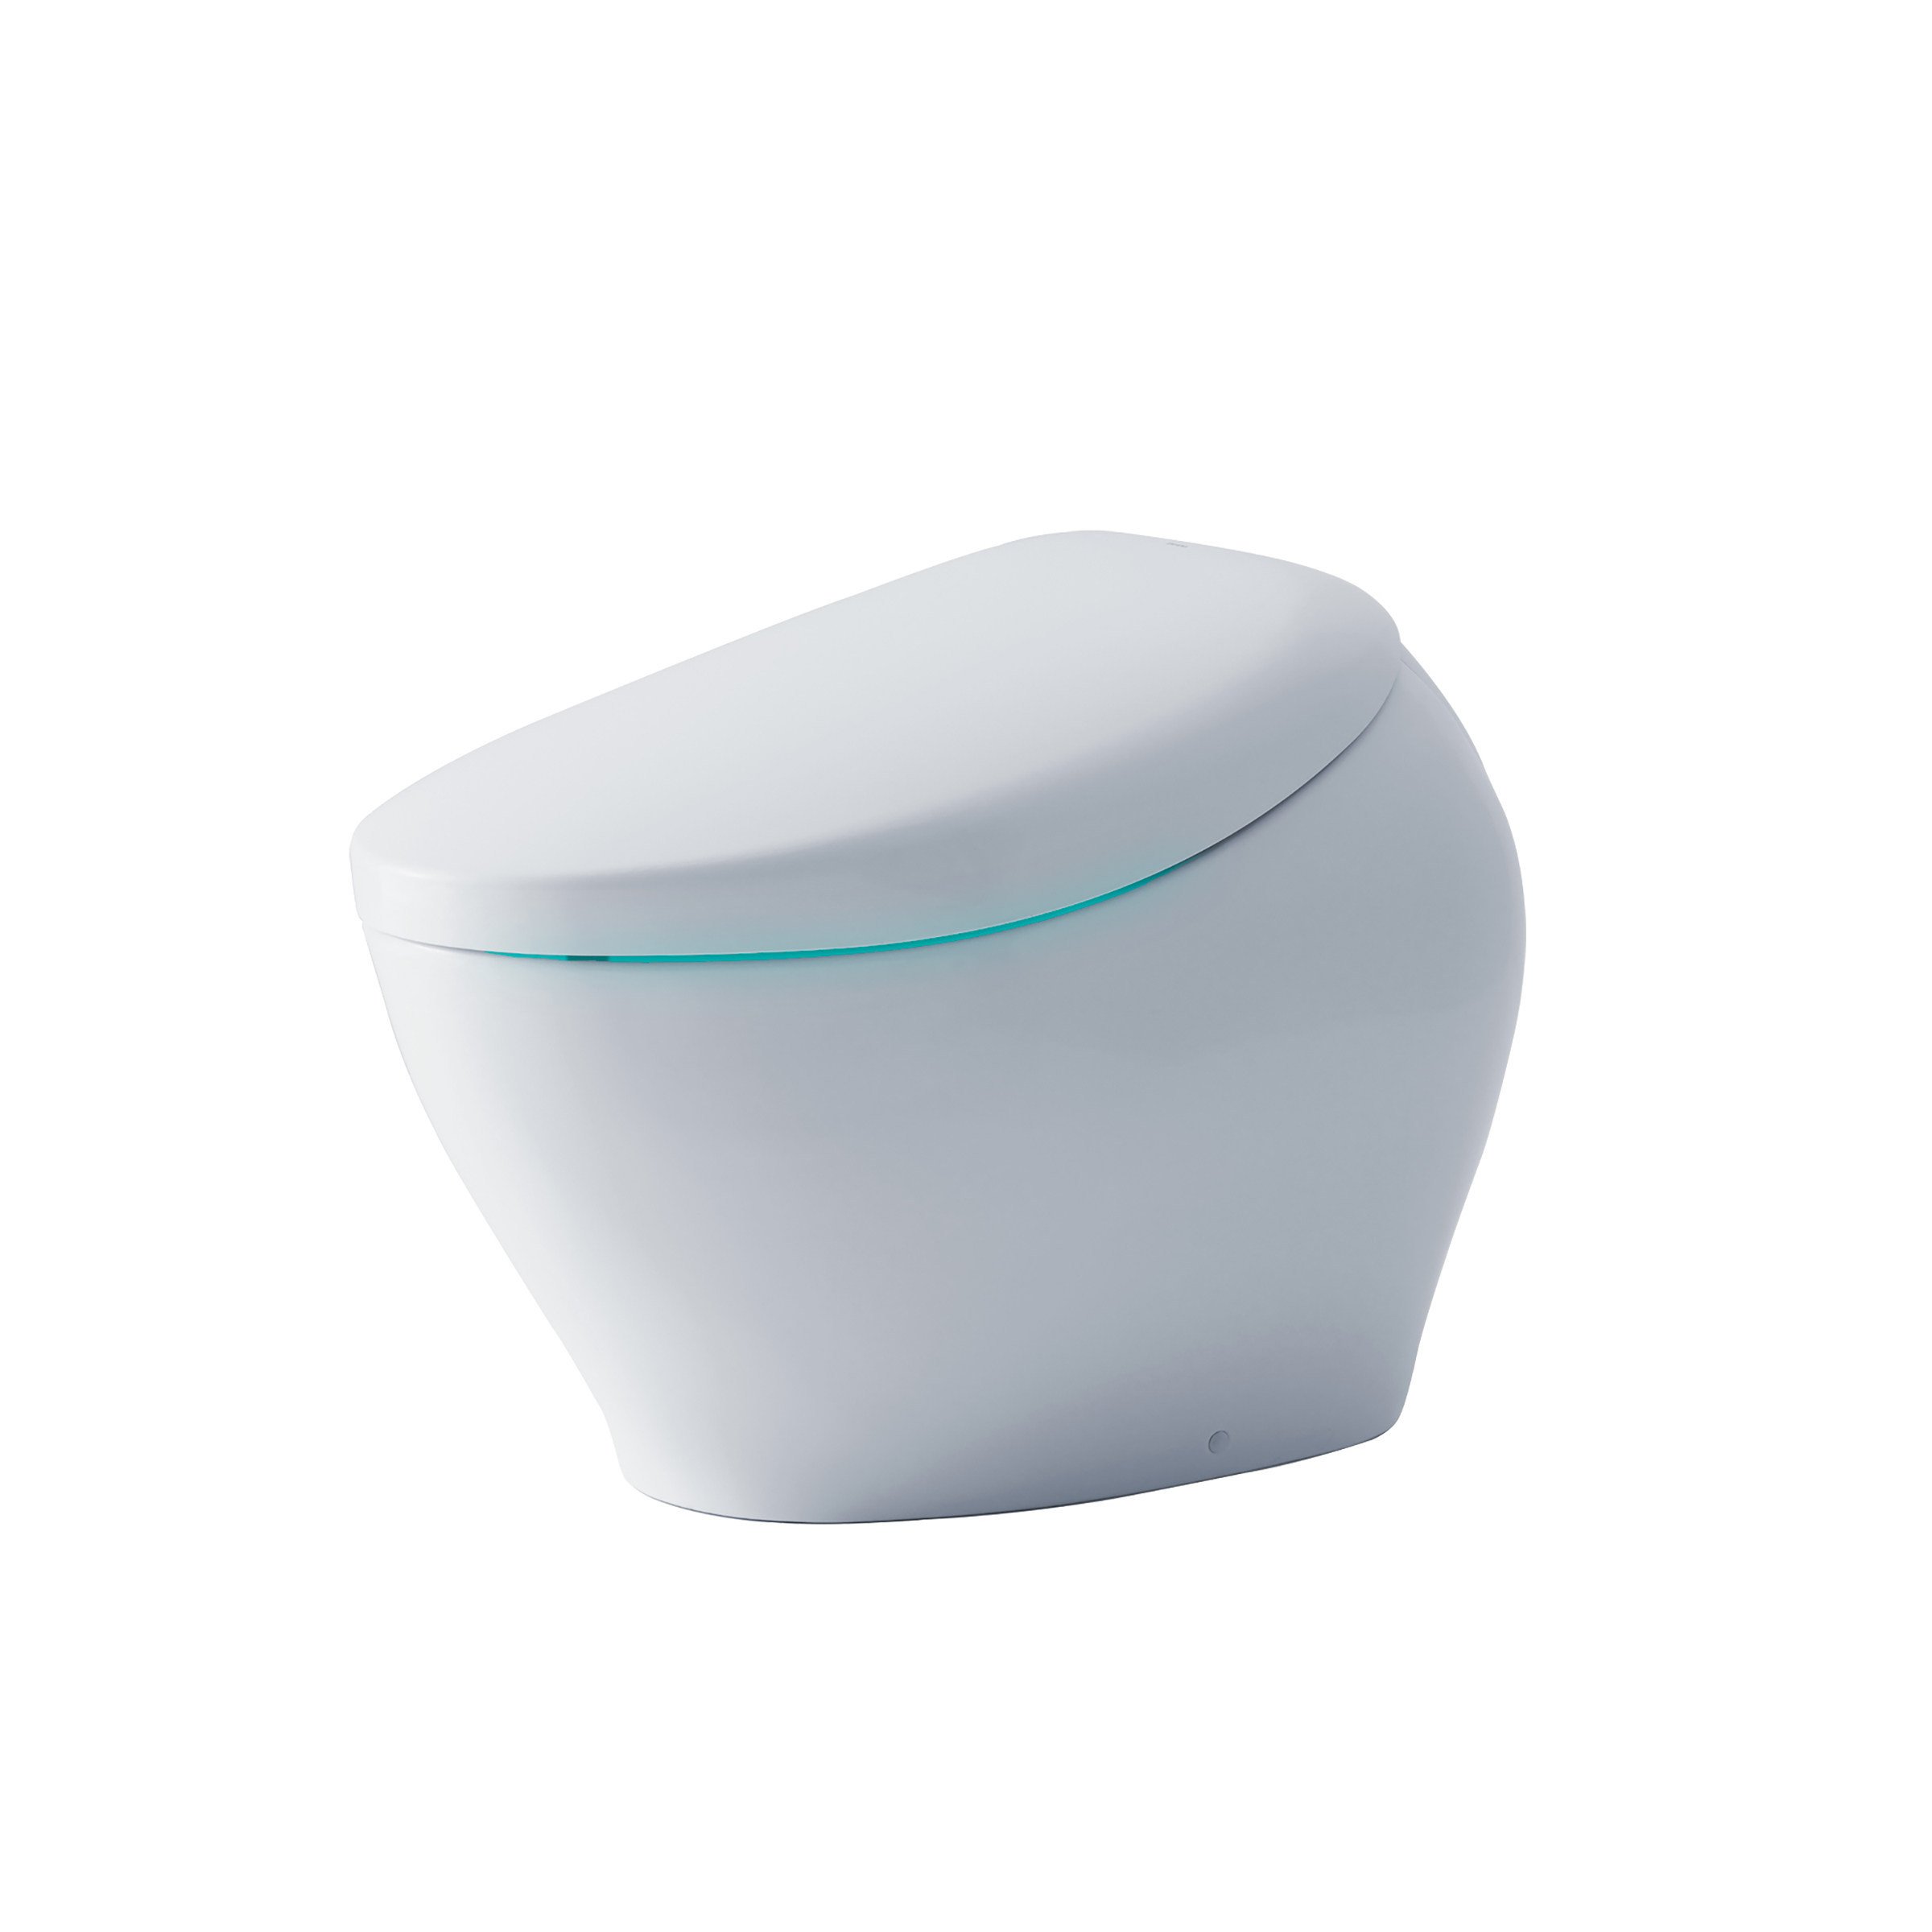 The NEOREST NX2 Intelligent Toilet. Source: Toto